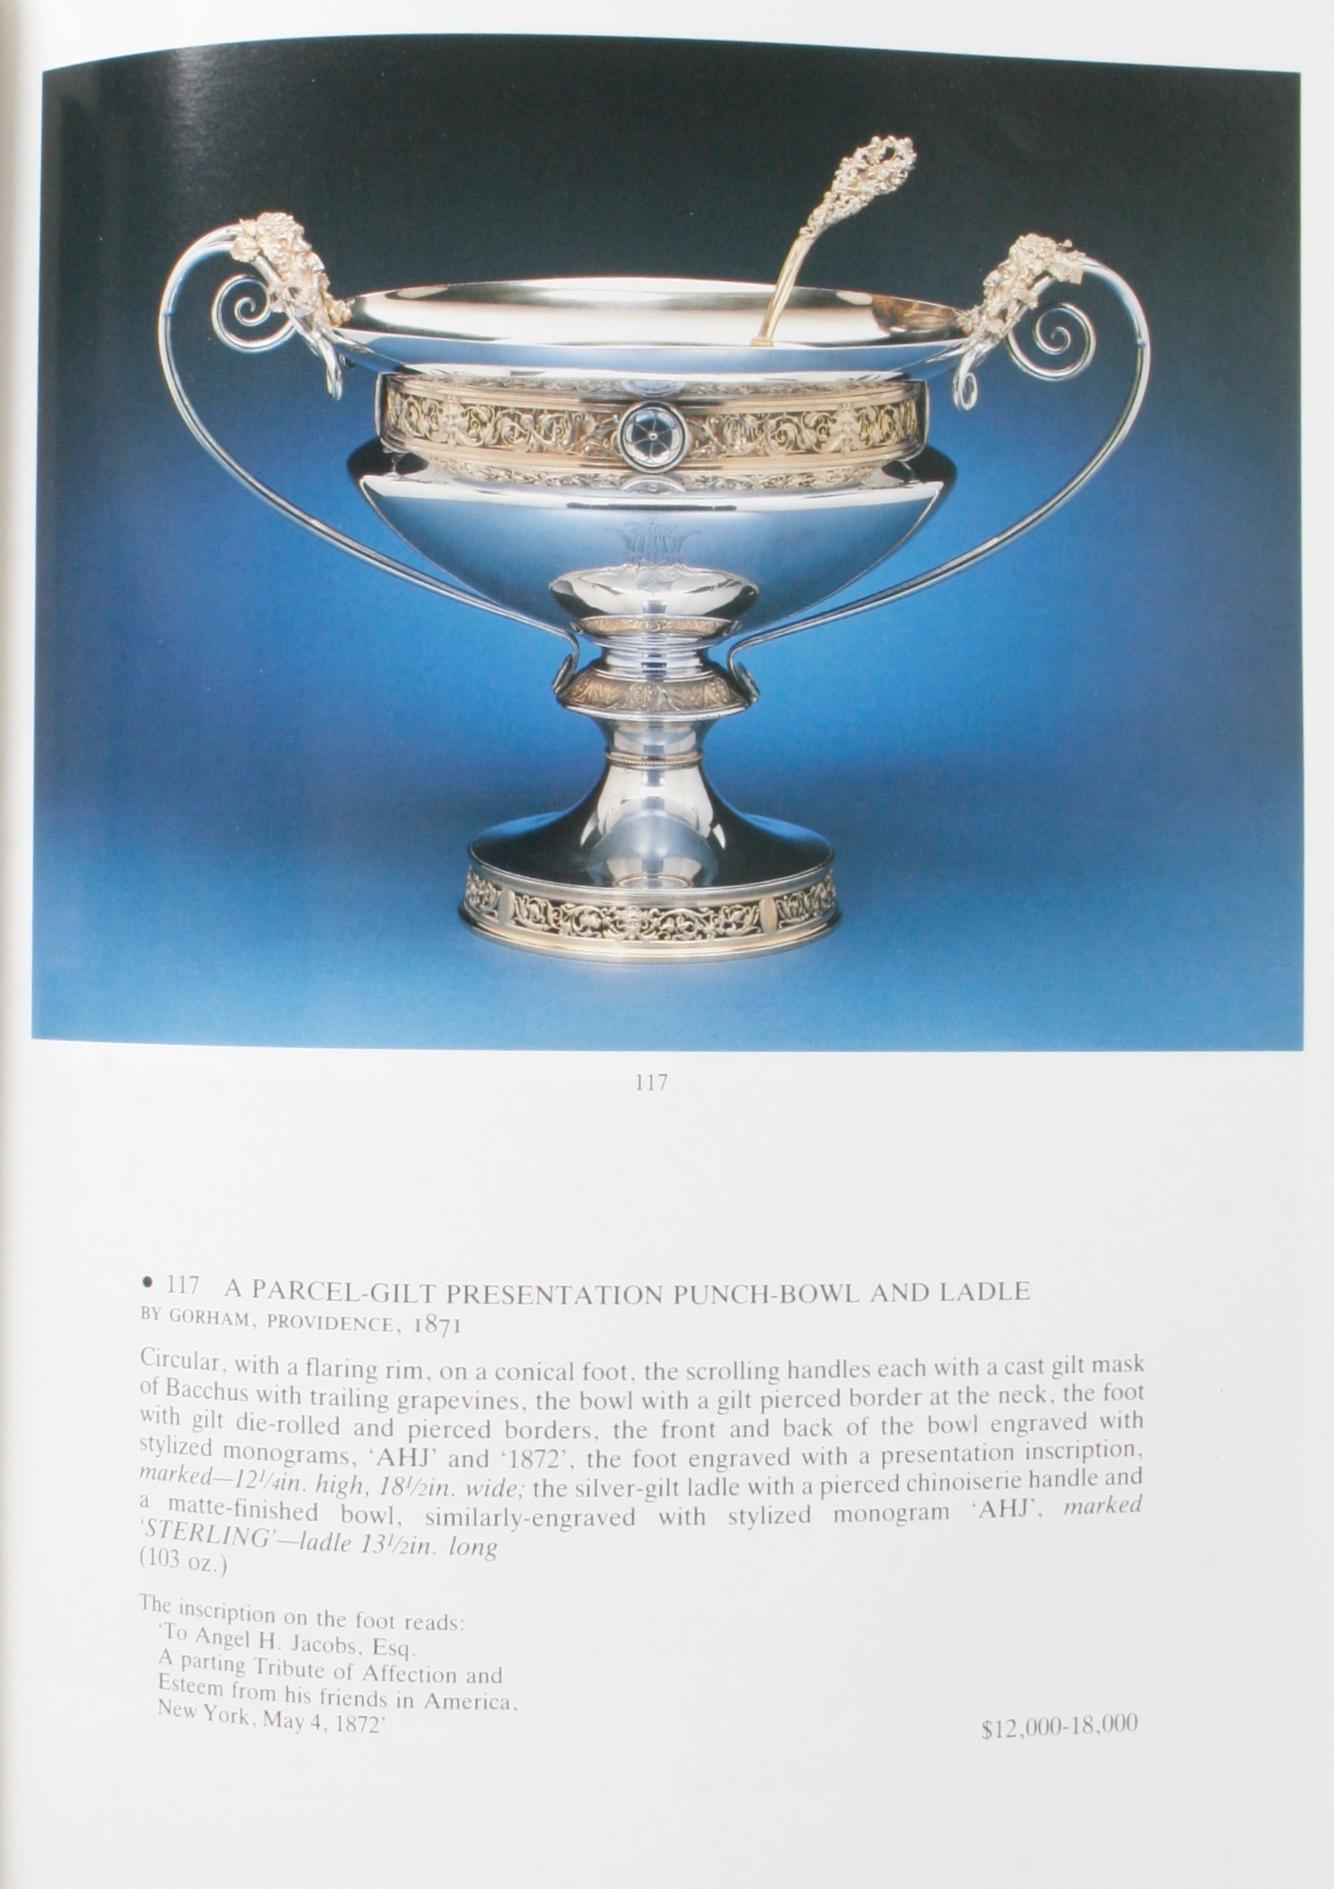 Christie's, The Sam Wagstaff Collection of American Silver, January 1989 2